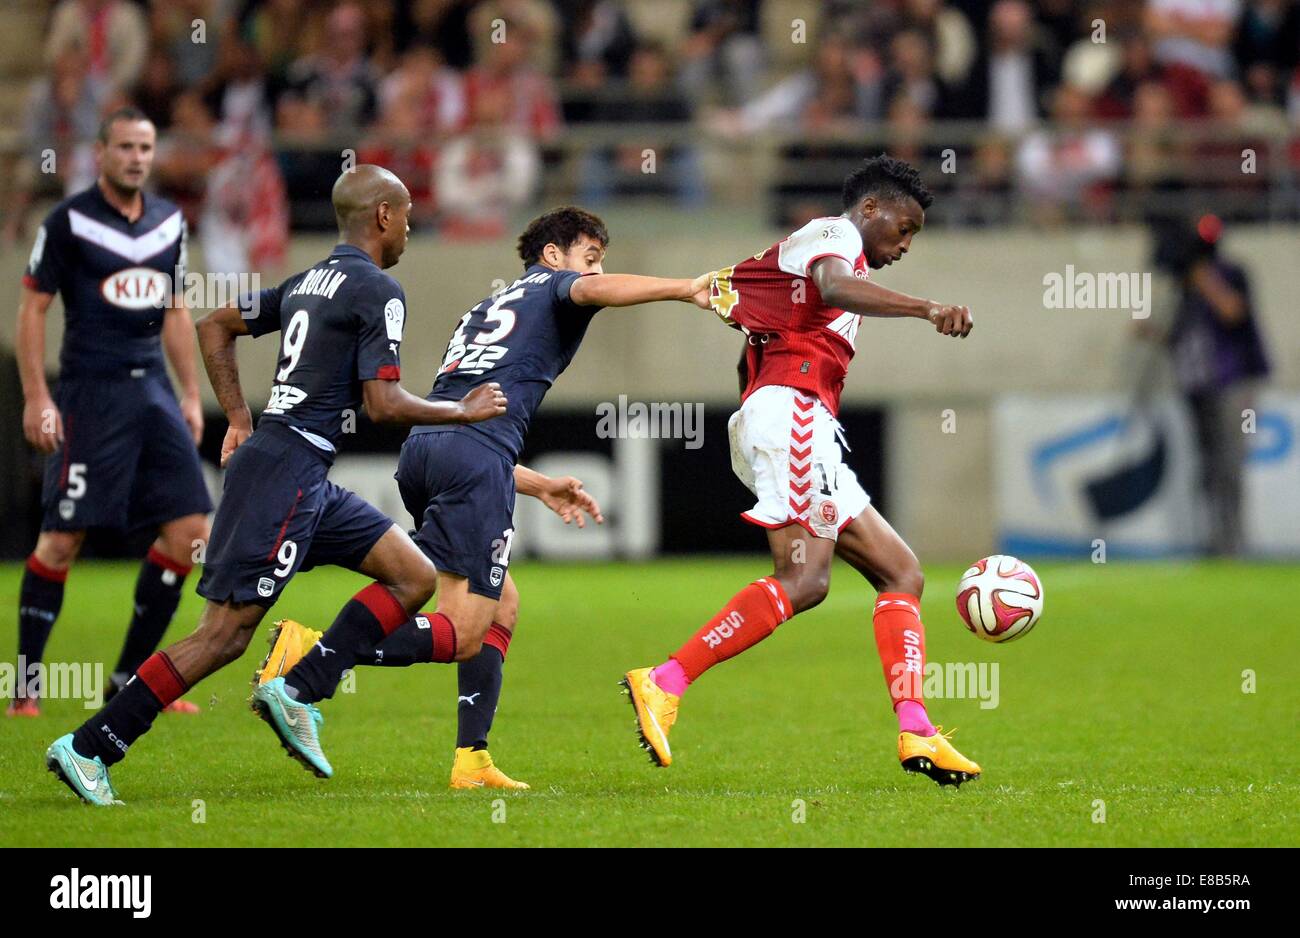 Rheims, France. 03rd Oct, 2014. French Division 1 League football. Reims versus Bordeaux. Benjamin Moukandjo (rei) and Younes Kaabouni (bor) © Action Plus Sports/Alamy Live News Stock Photo